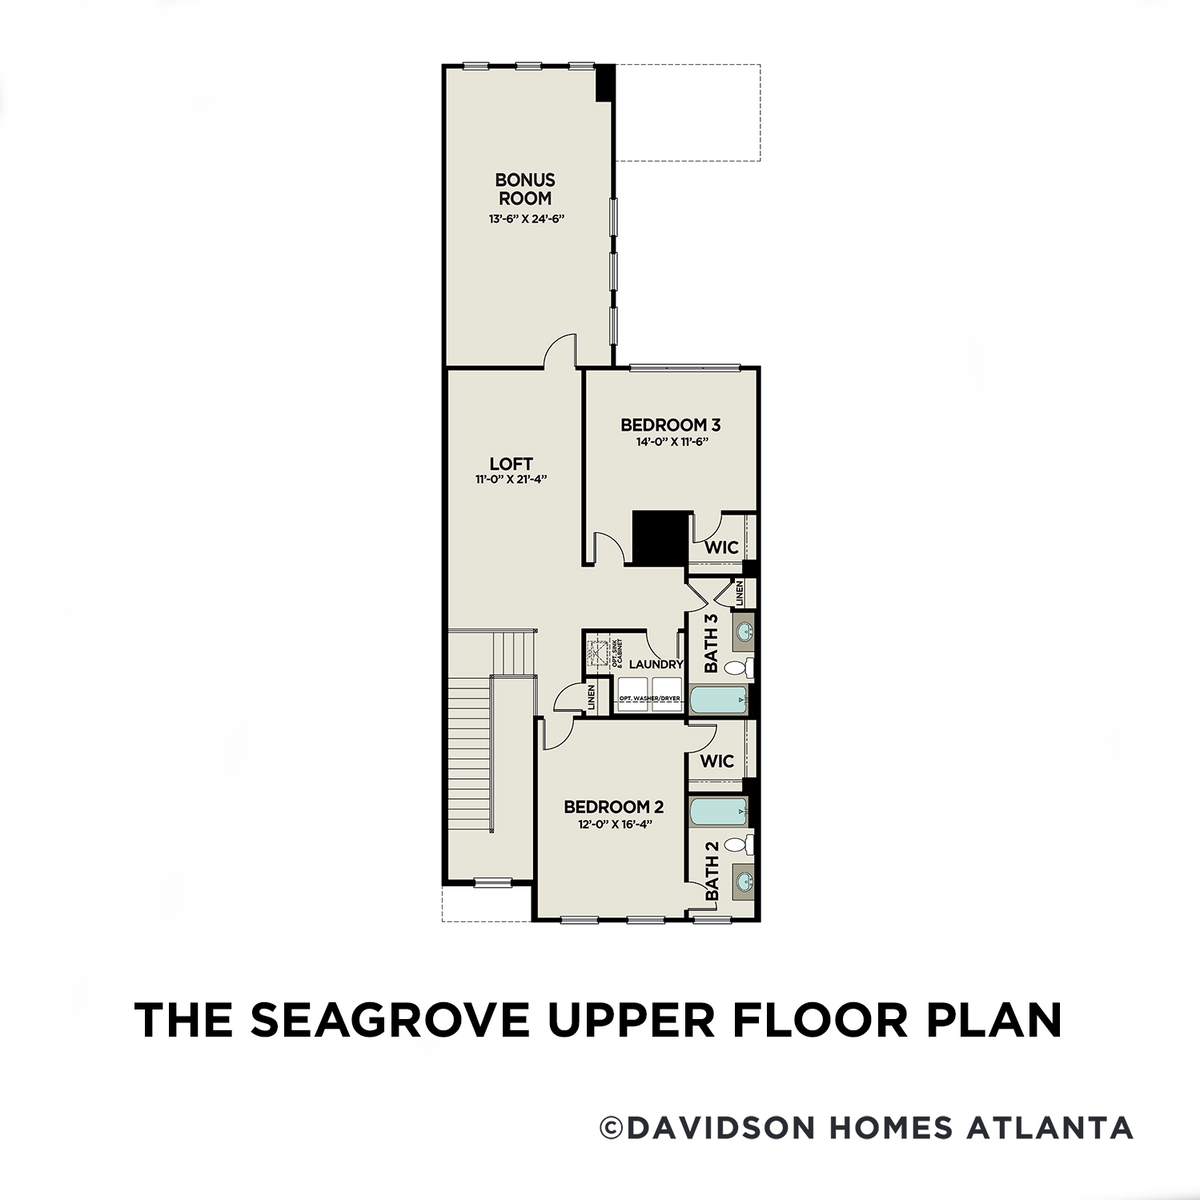 2 - The Seagrove C floor plan layout for 756 Stickley Oak Way in Davidson Homes' The Village at Towne Lake community.